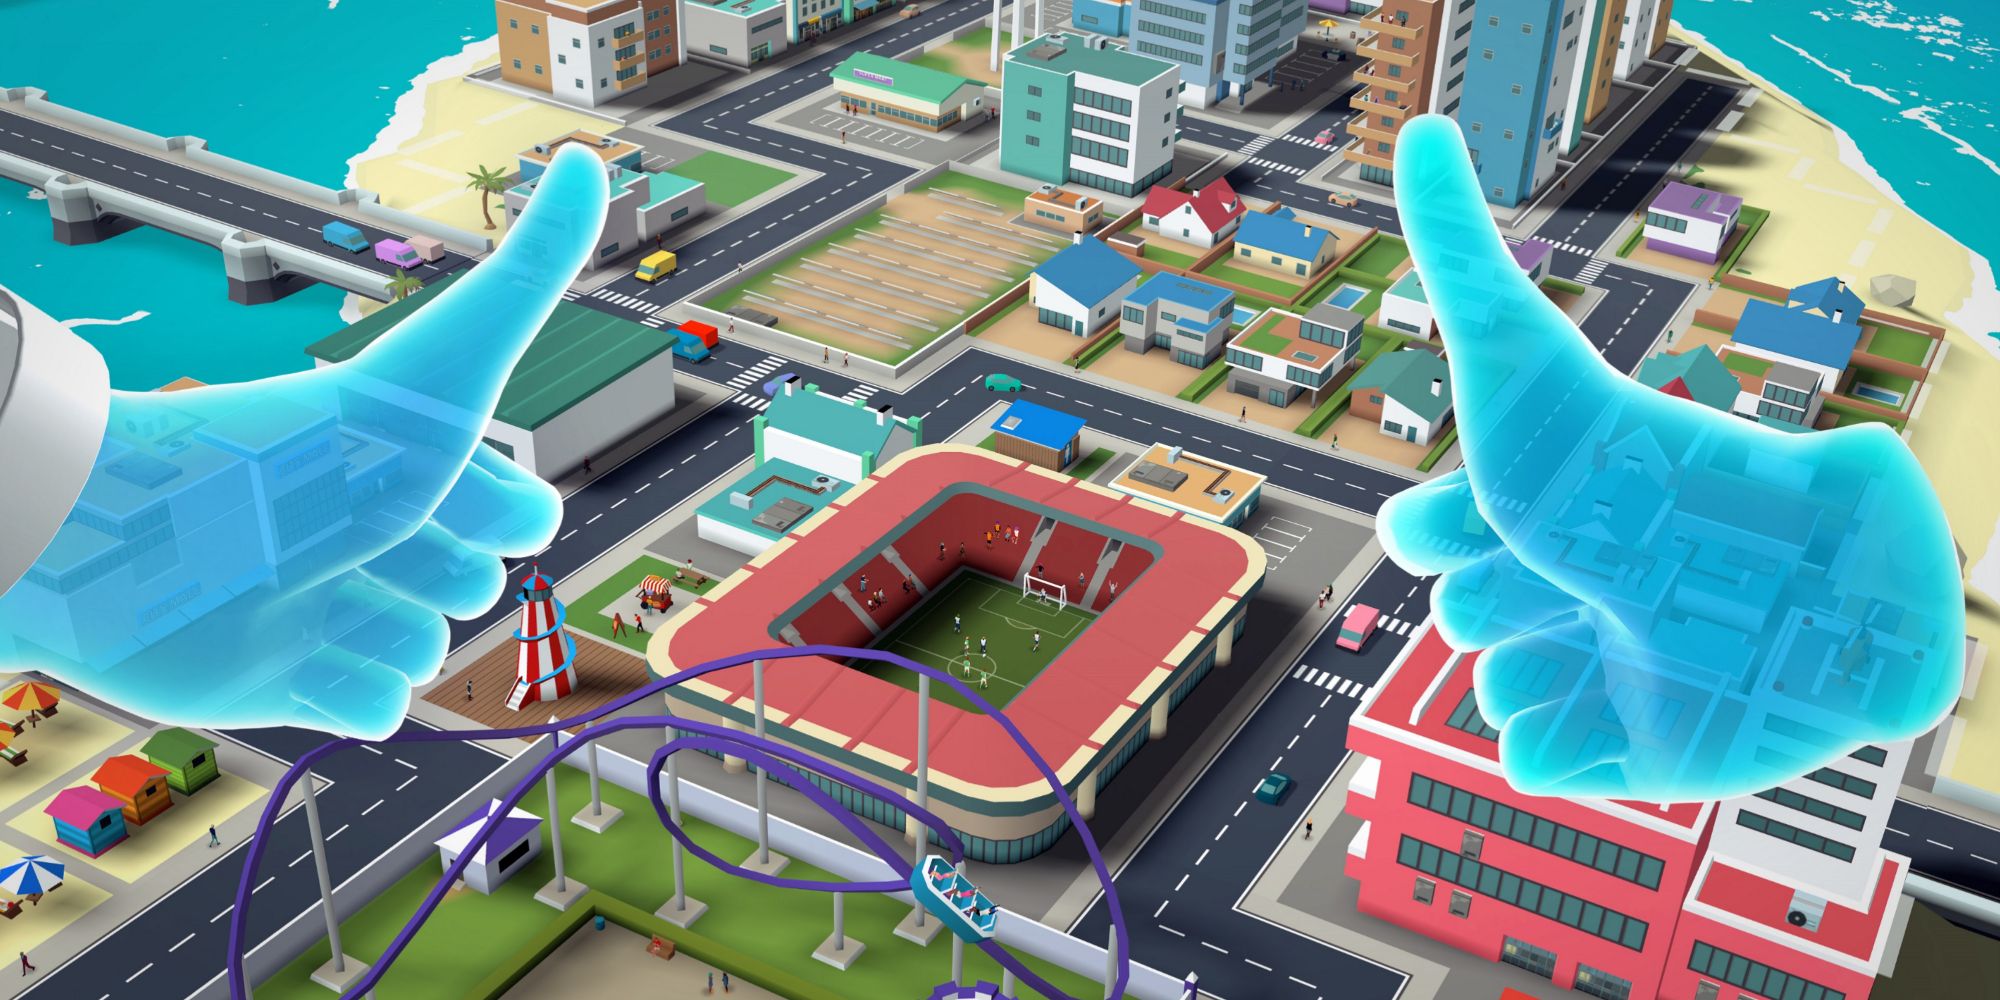 Little Cities - Player giving a thumbs up to a stadium